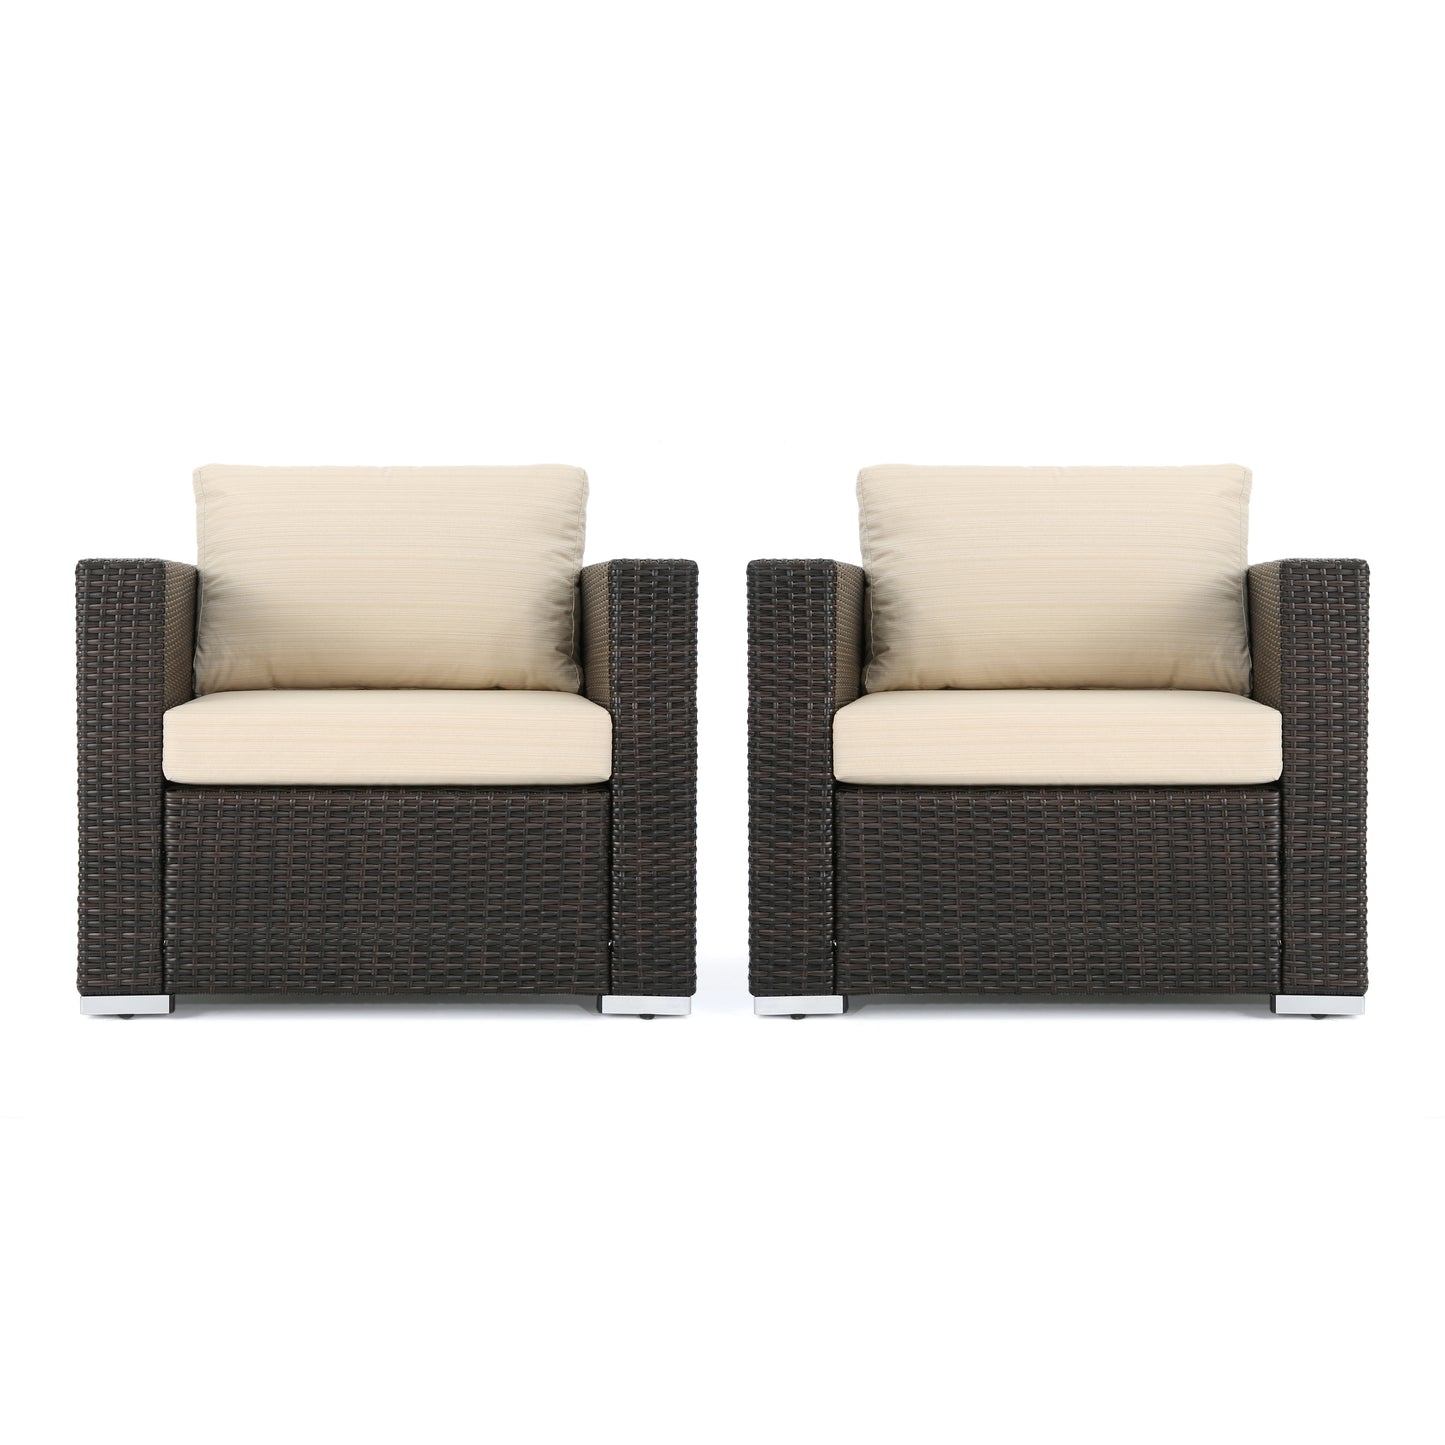 Avianna Outdoor Wicker Club Chair with Cushions, Set of 2